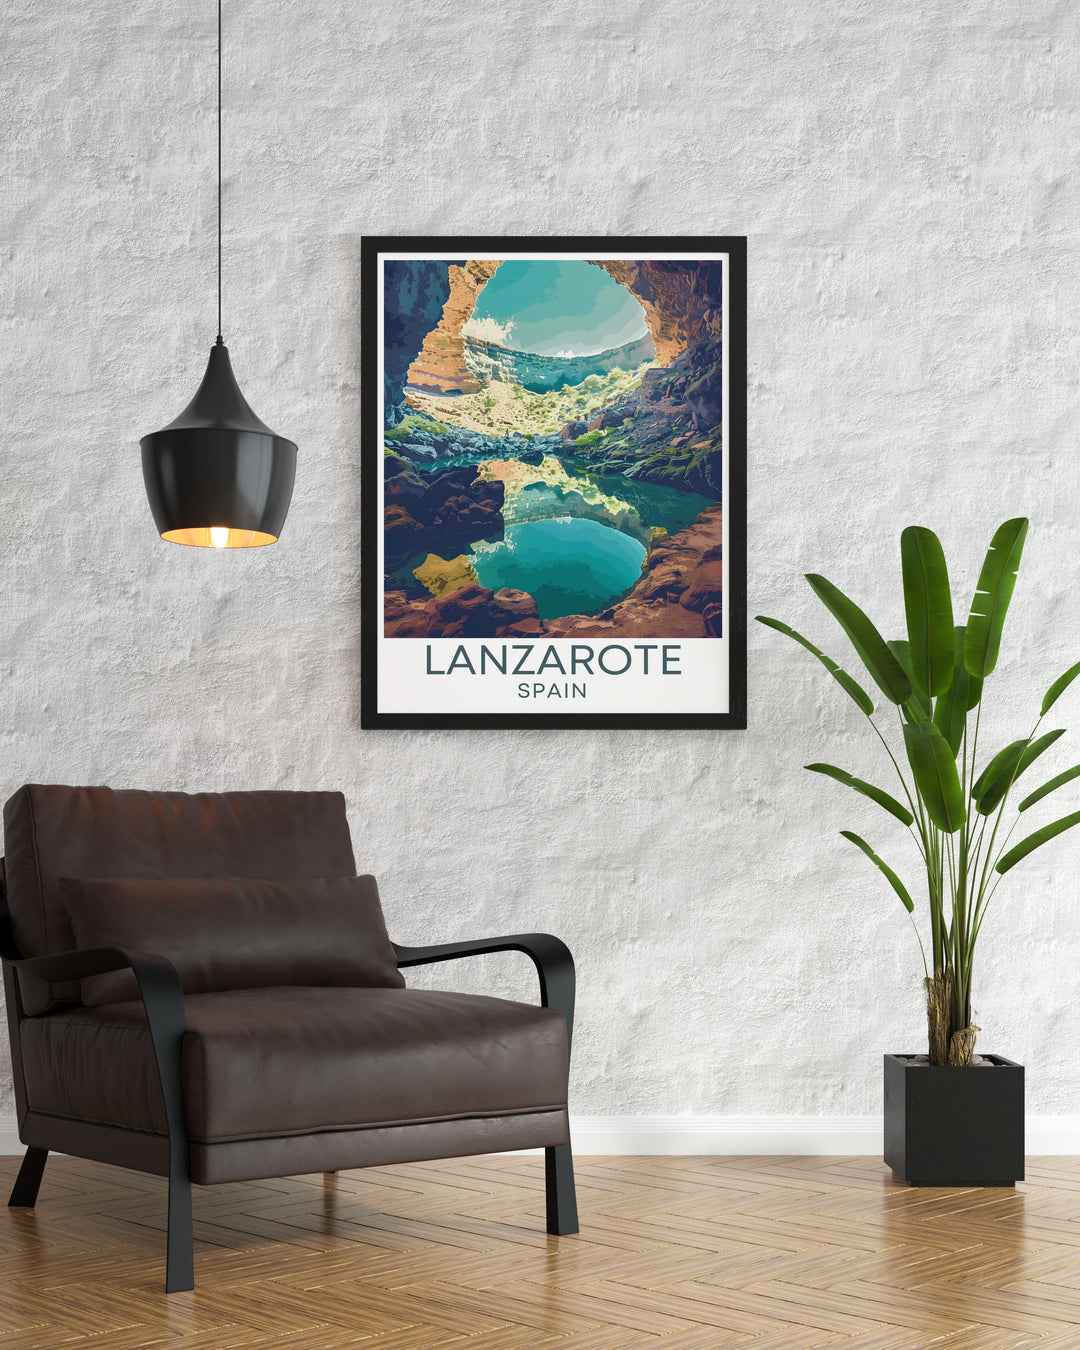 This detailed poster of Jameos del Agua illustrates the serene subterranean lake and rare albino crabs, encapsulating the tranquil and mysterious atmosphere of this iconic Lanzarote landmark, making it an exquisite addition to your travel art collection.